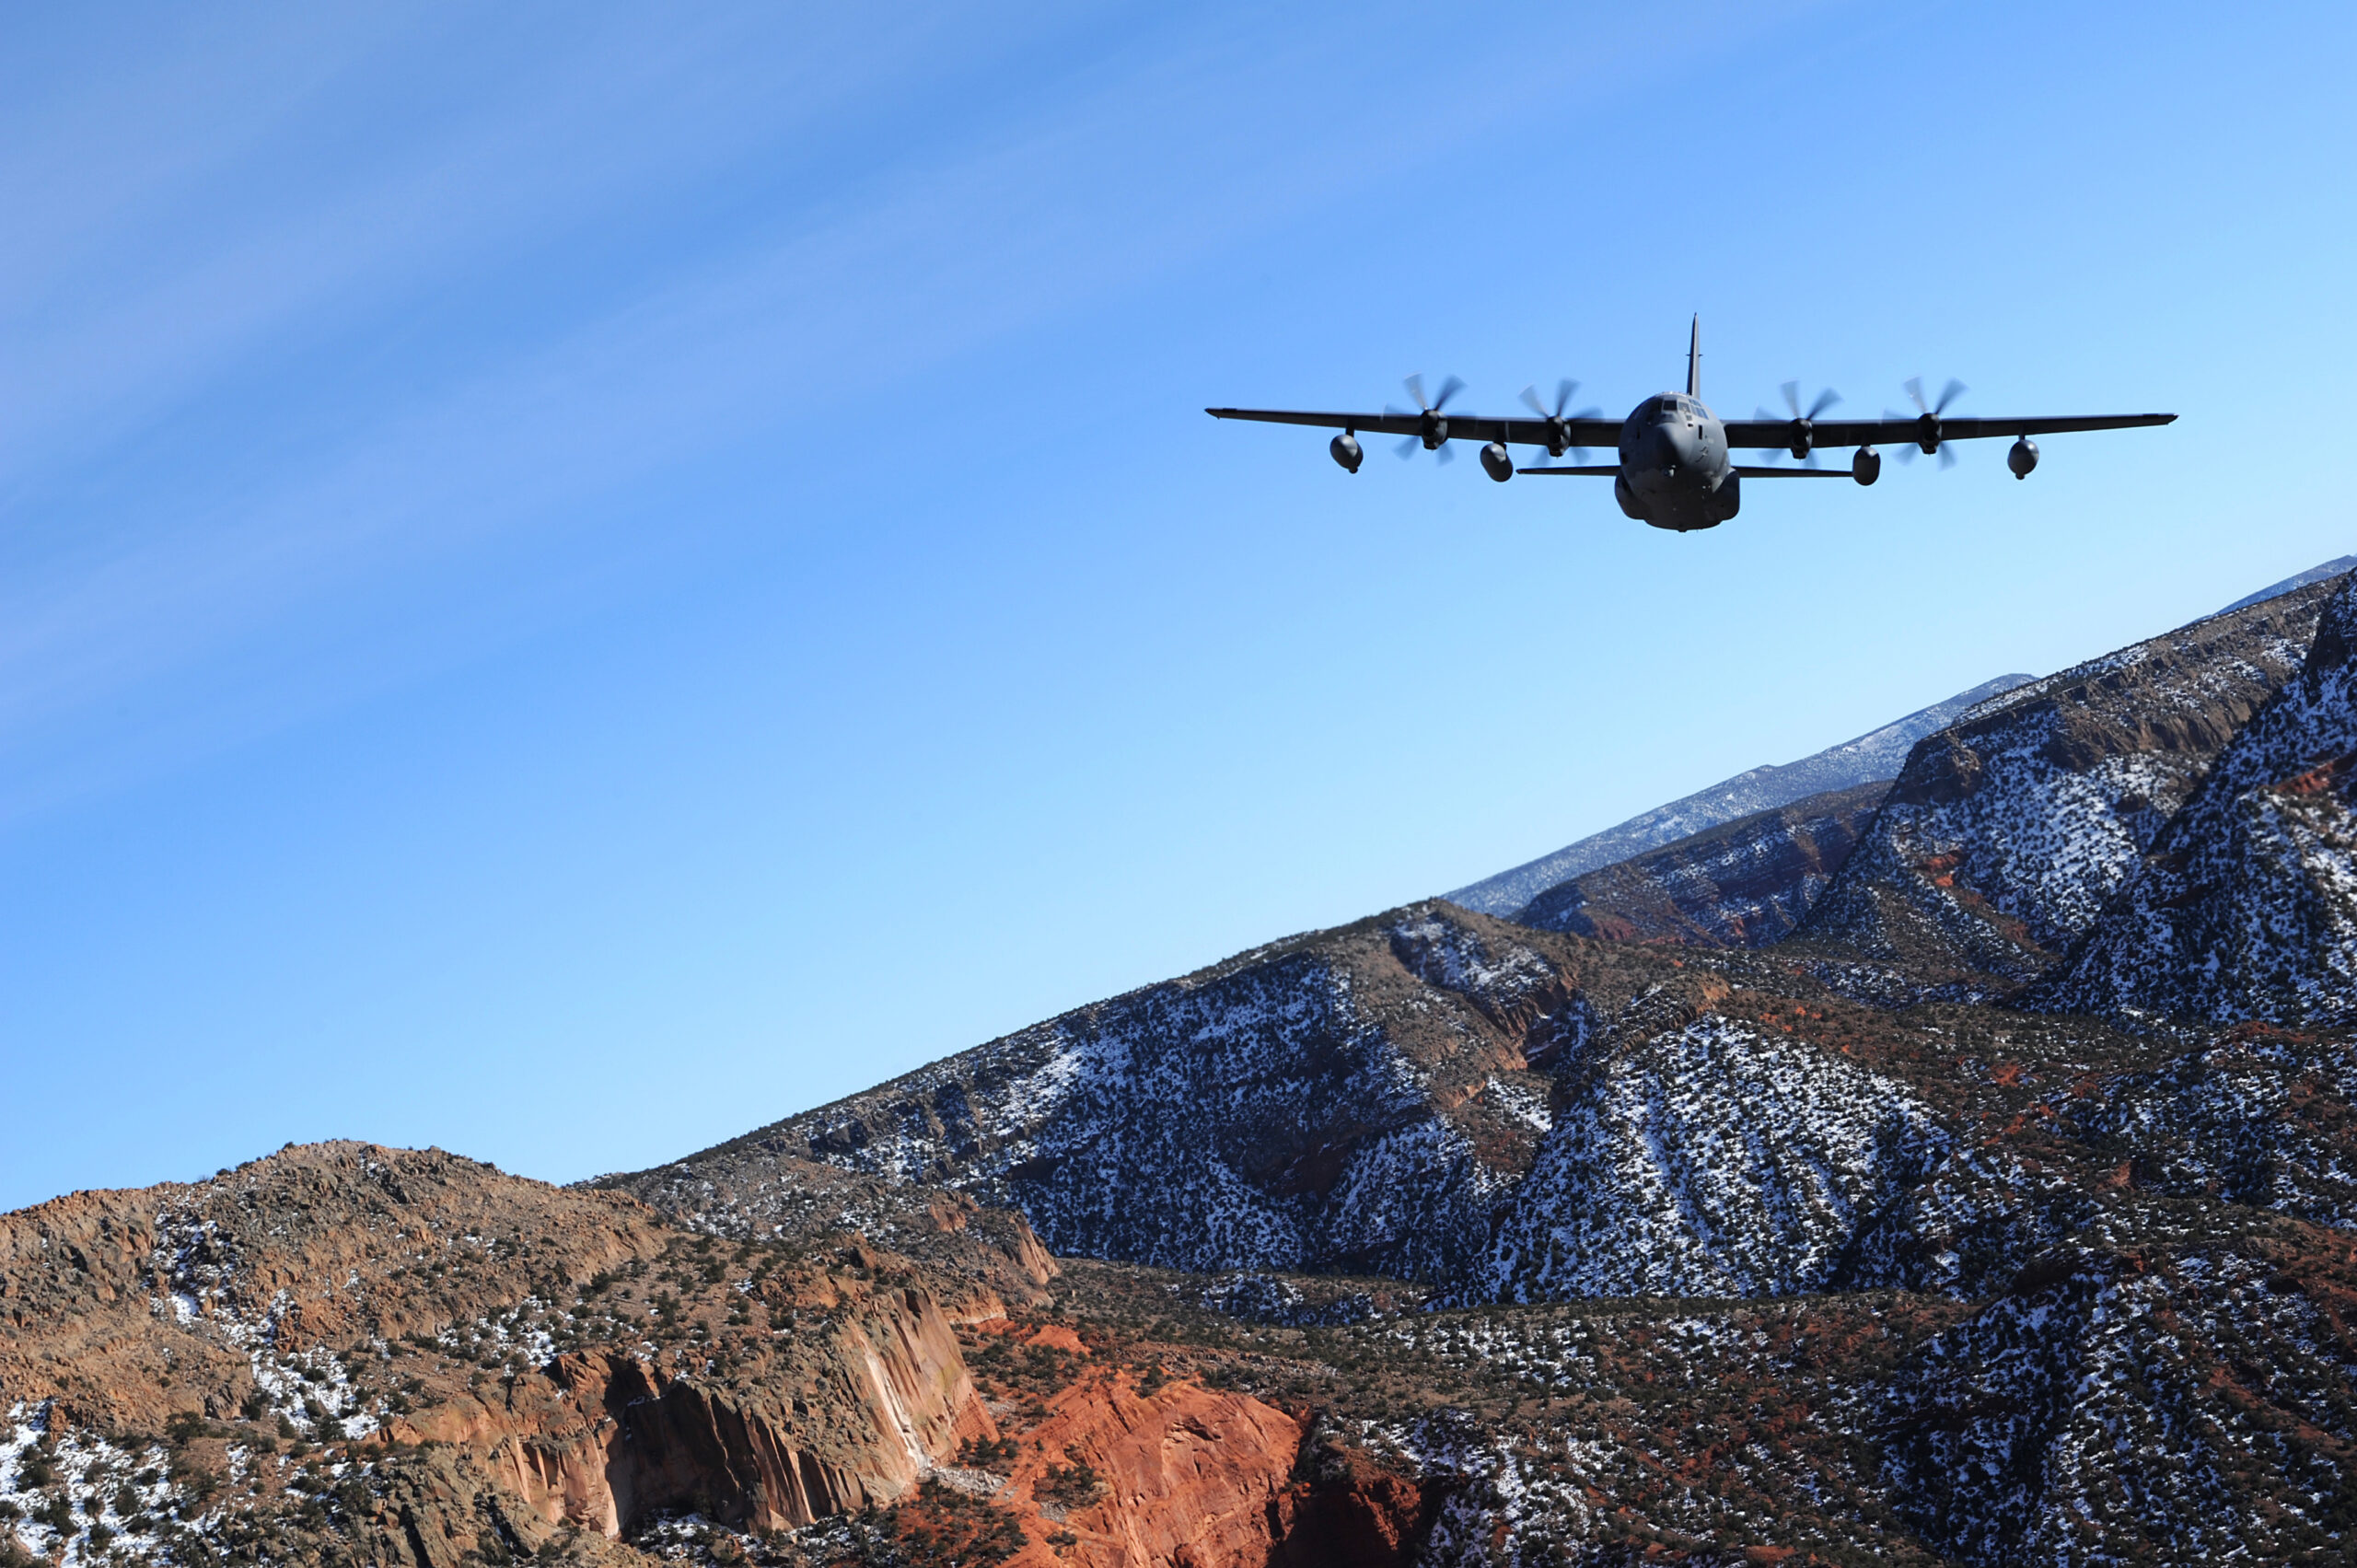 A 52nd Special Operations Squadron MC-130J Combat Shadow II aircraft flies over the skies of New Mexico.